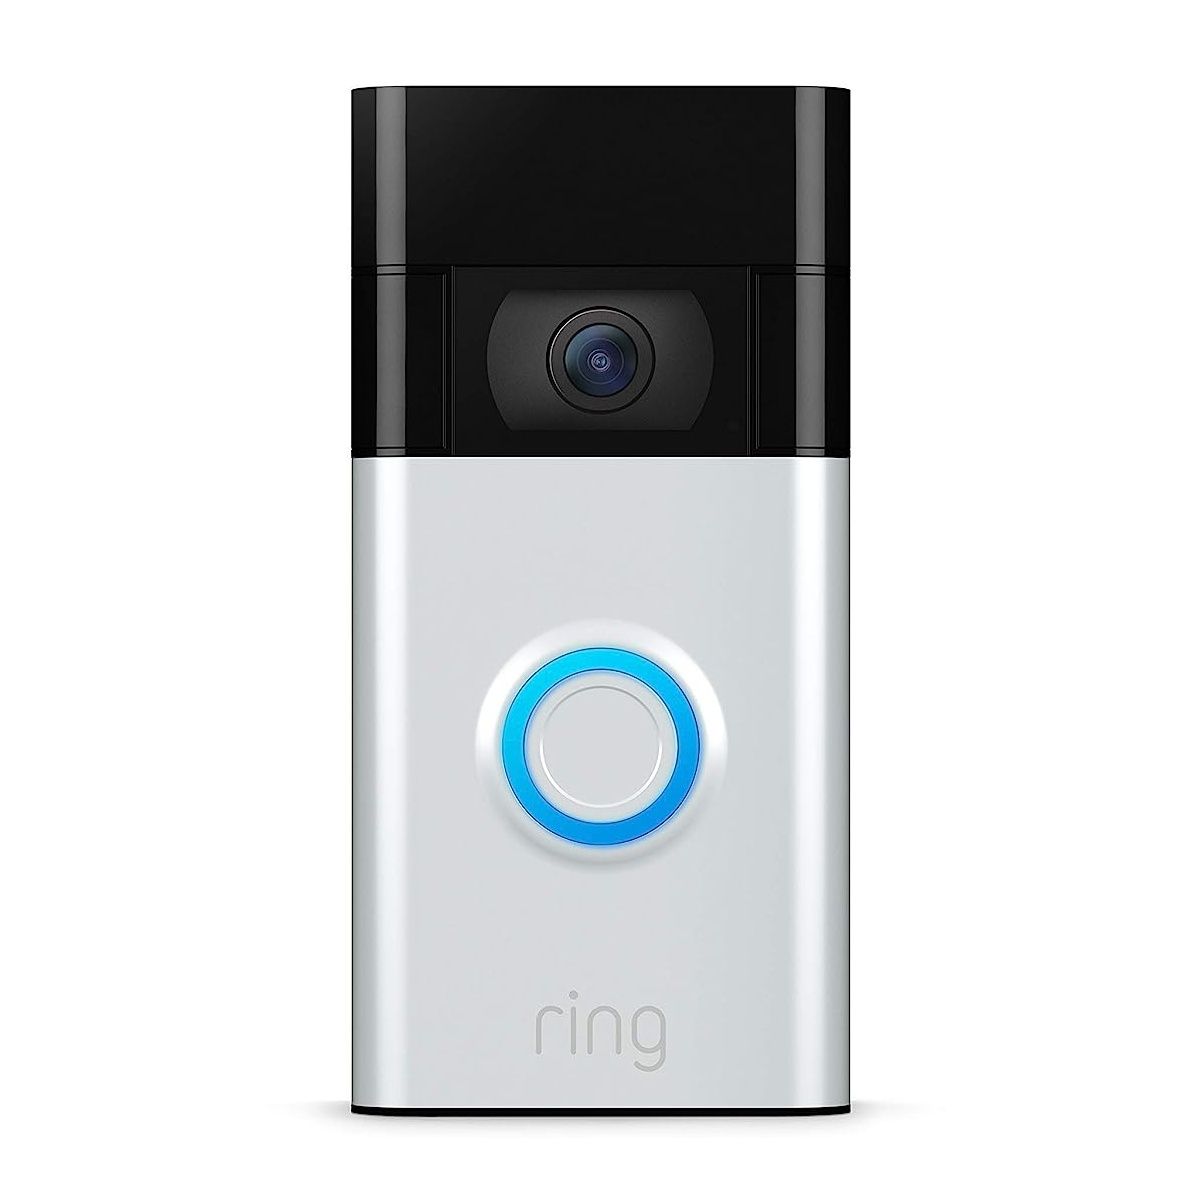 Ring Video Doorbell discounted as part of early Prime Day deals